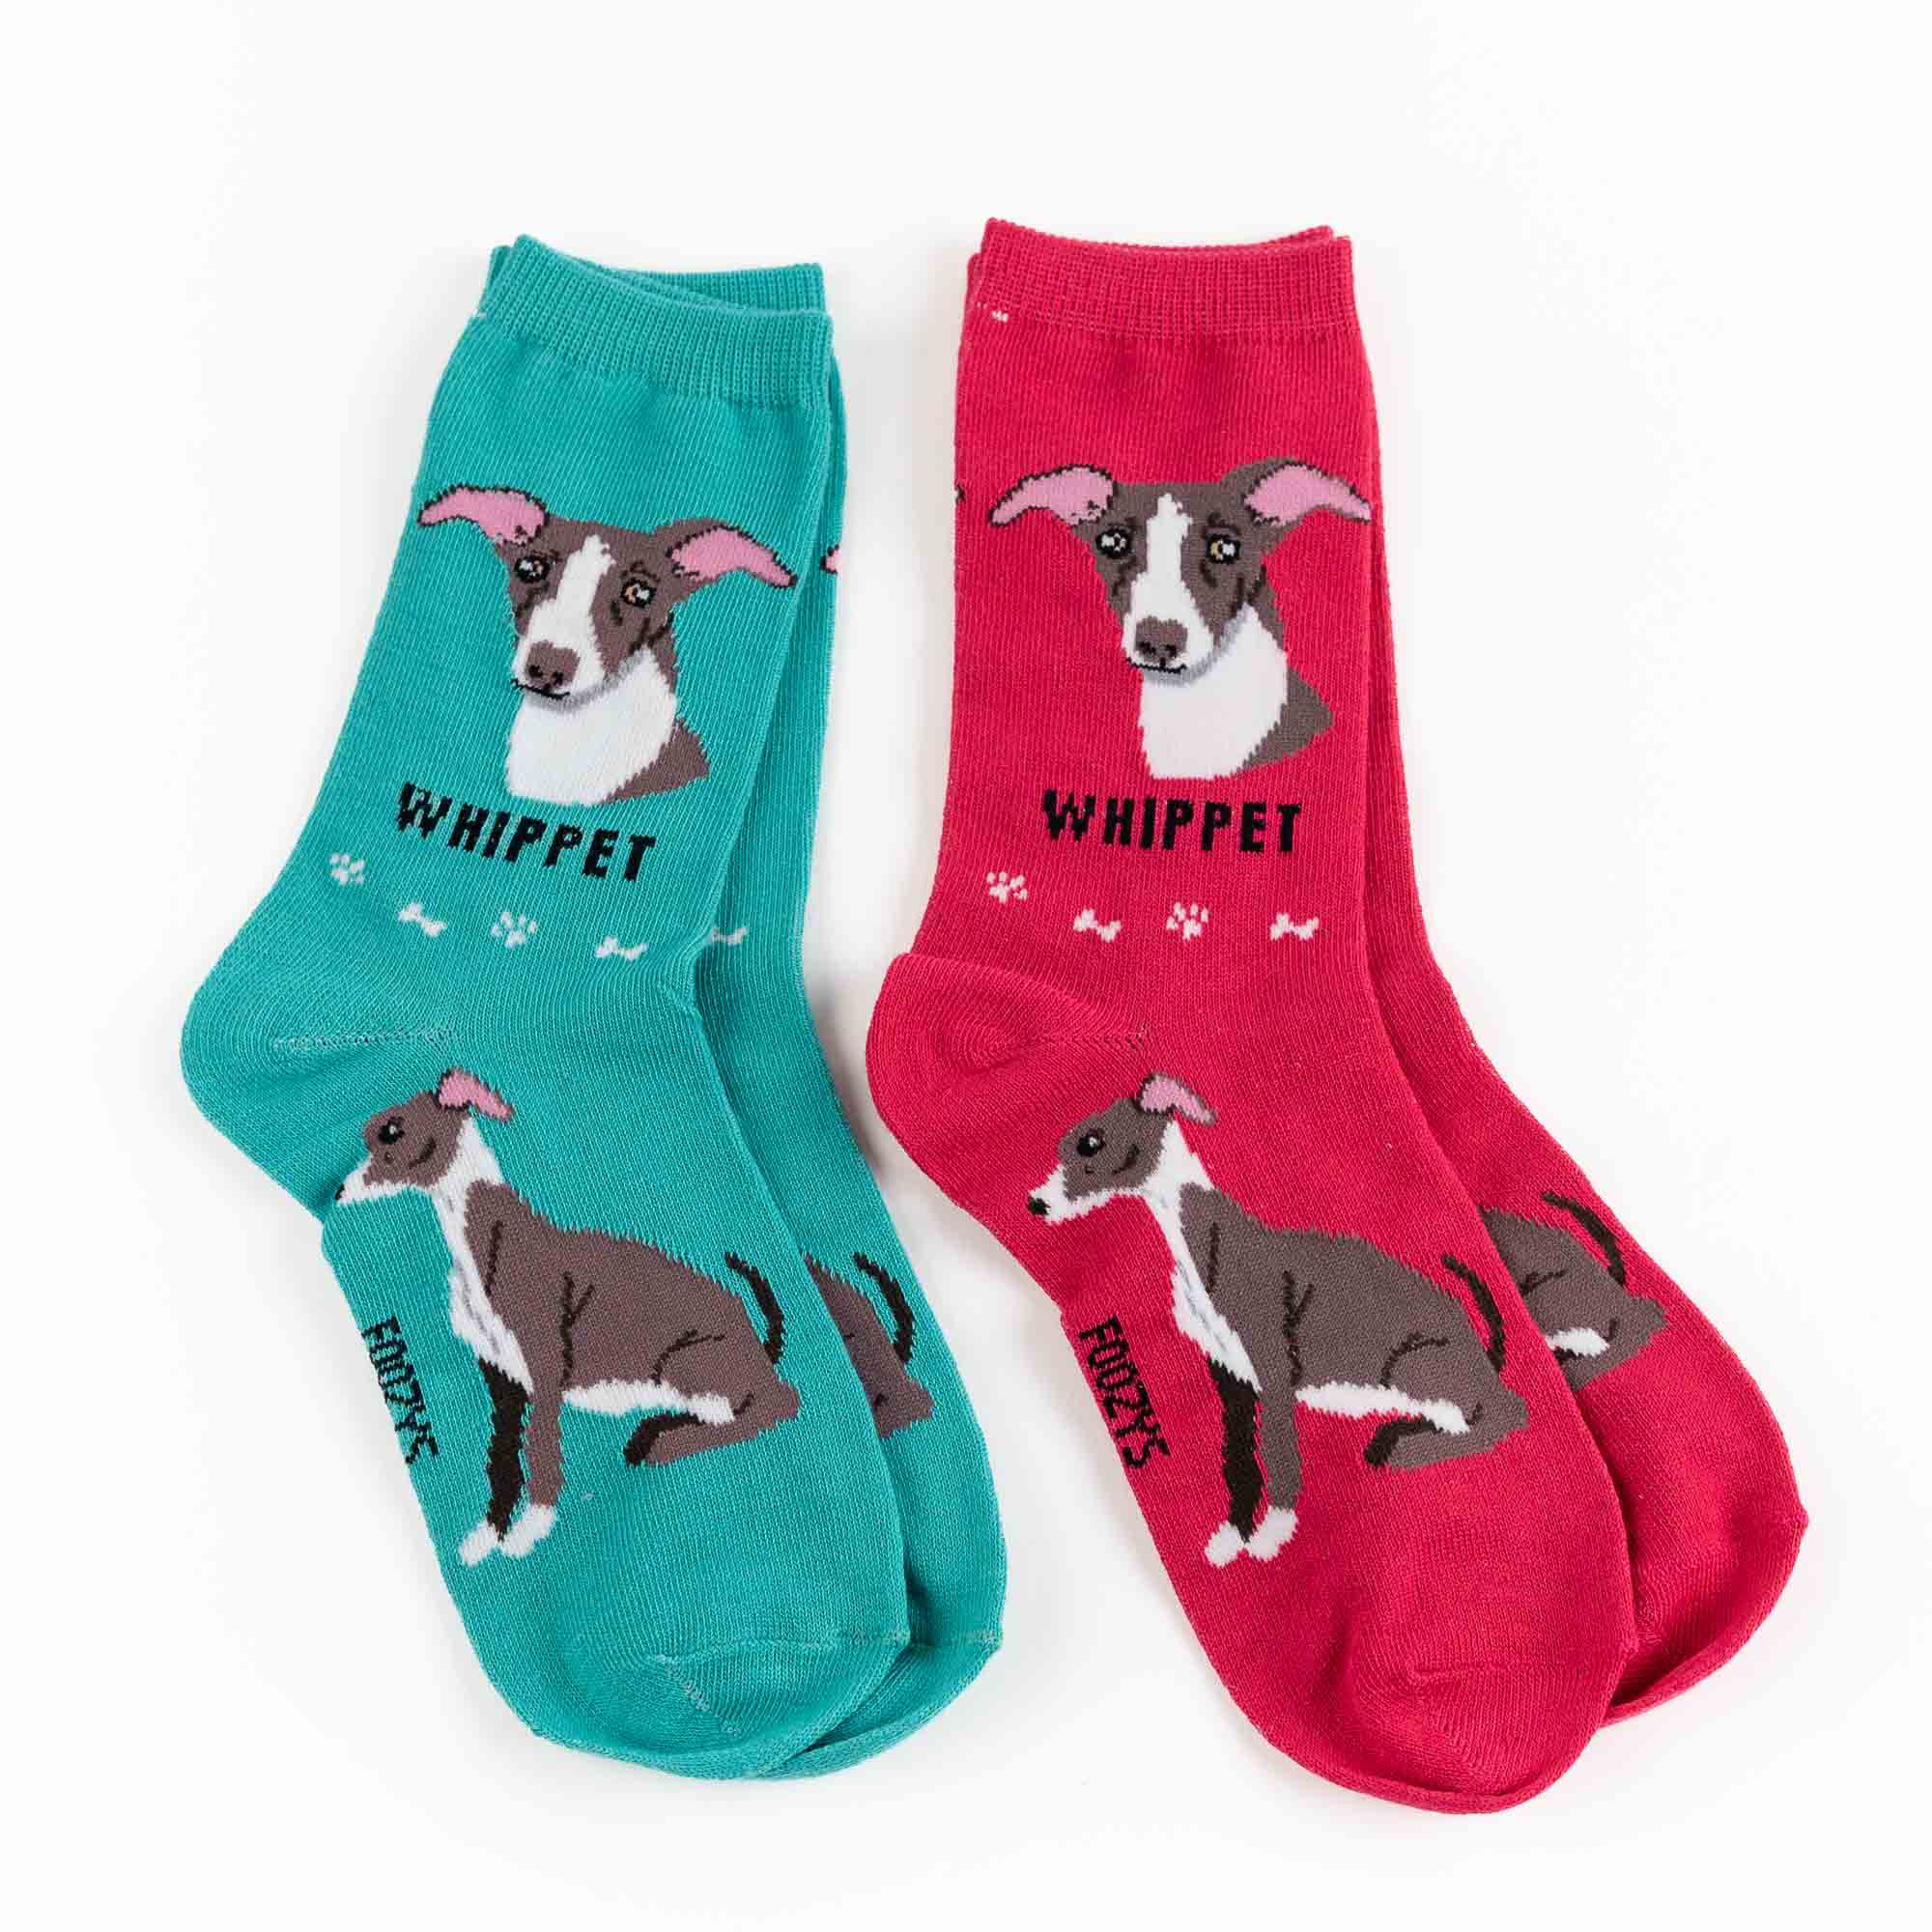 My Favorite Dog Breed Socks ️ Whippet - 2 Set Collection